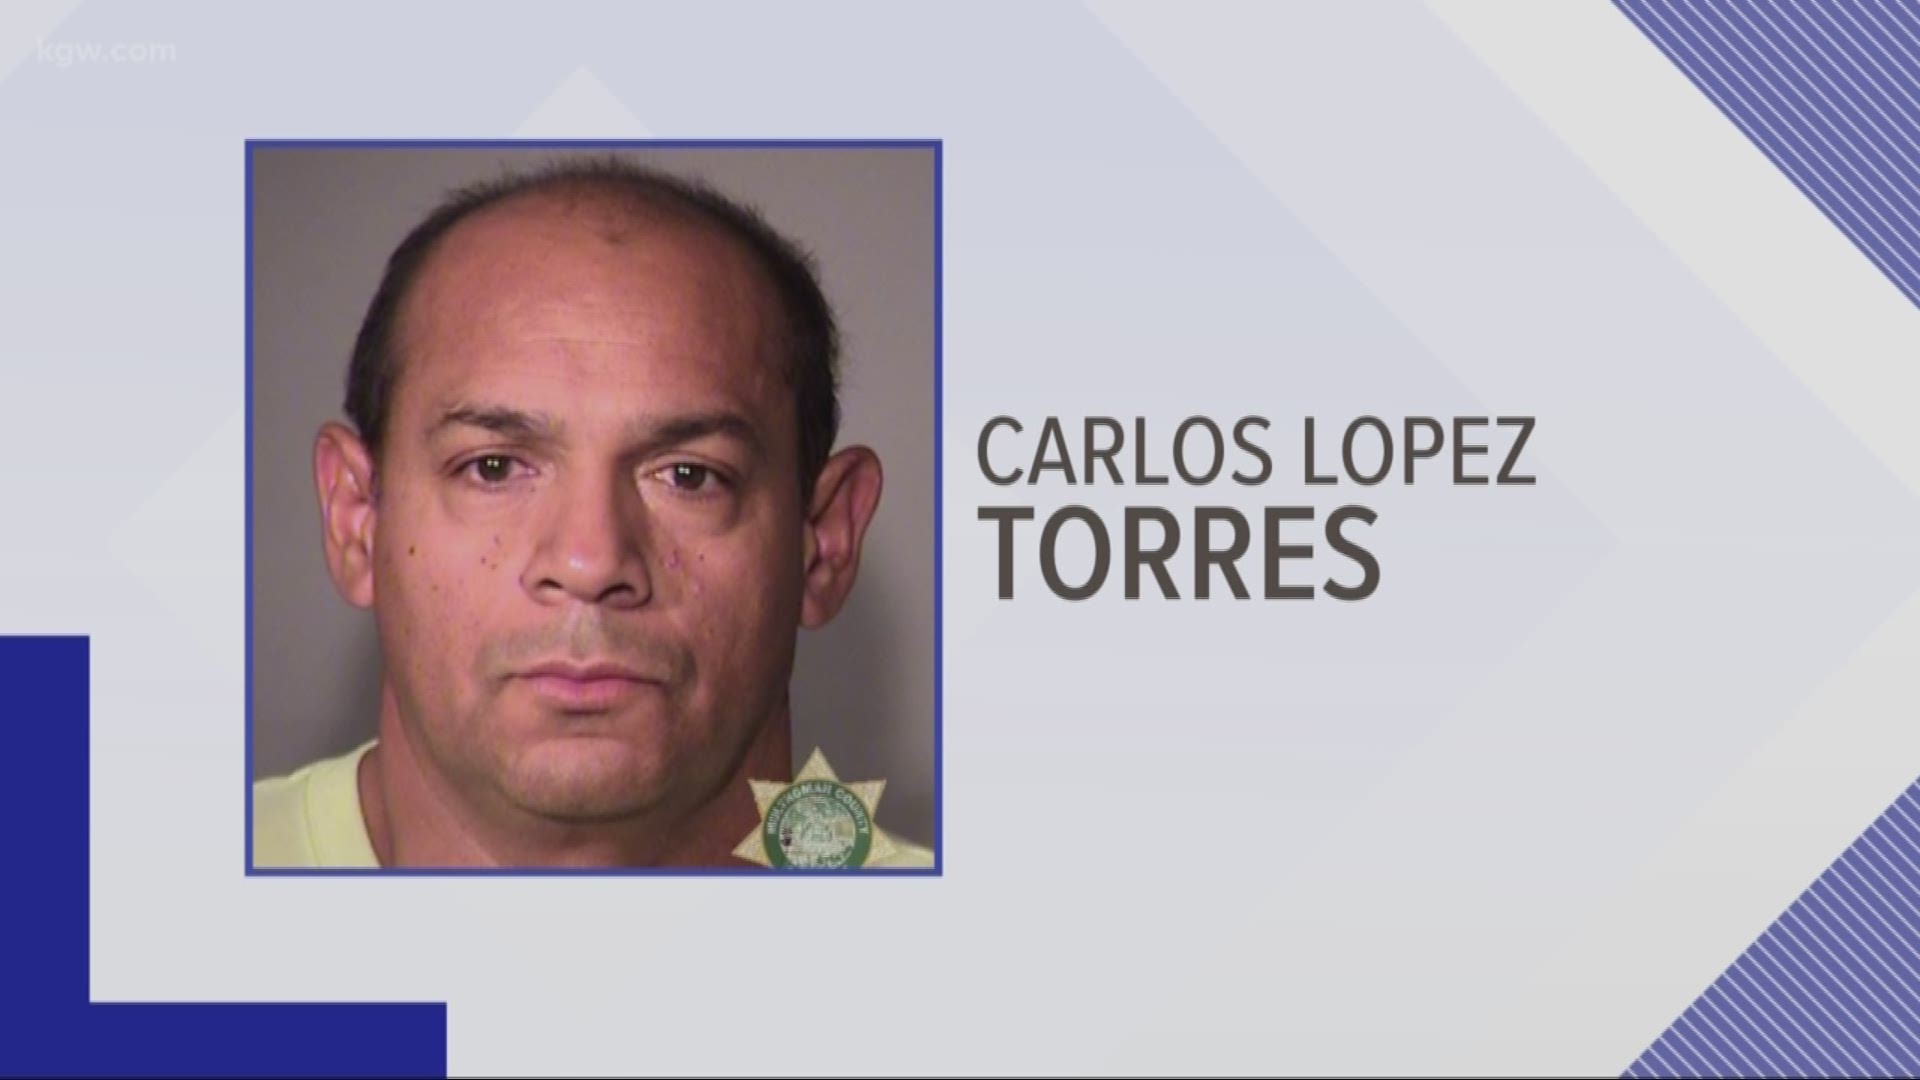 A man is accused of illegally towing more than 300 vehicles in Portland and Vancouver and selling those vehicles to a scrap metal company.